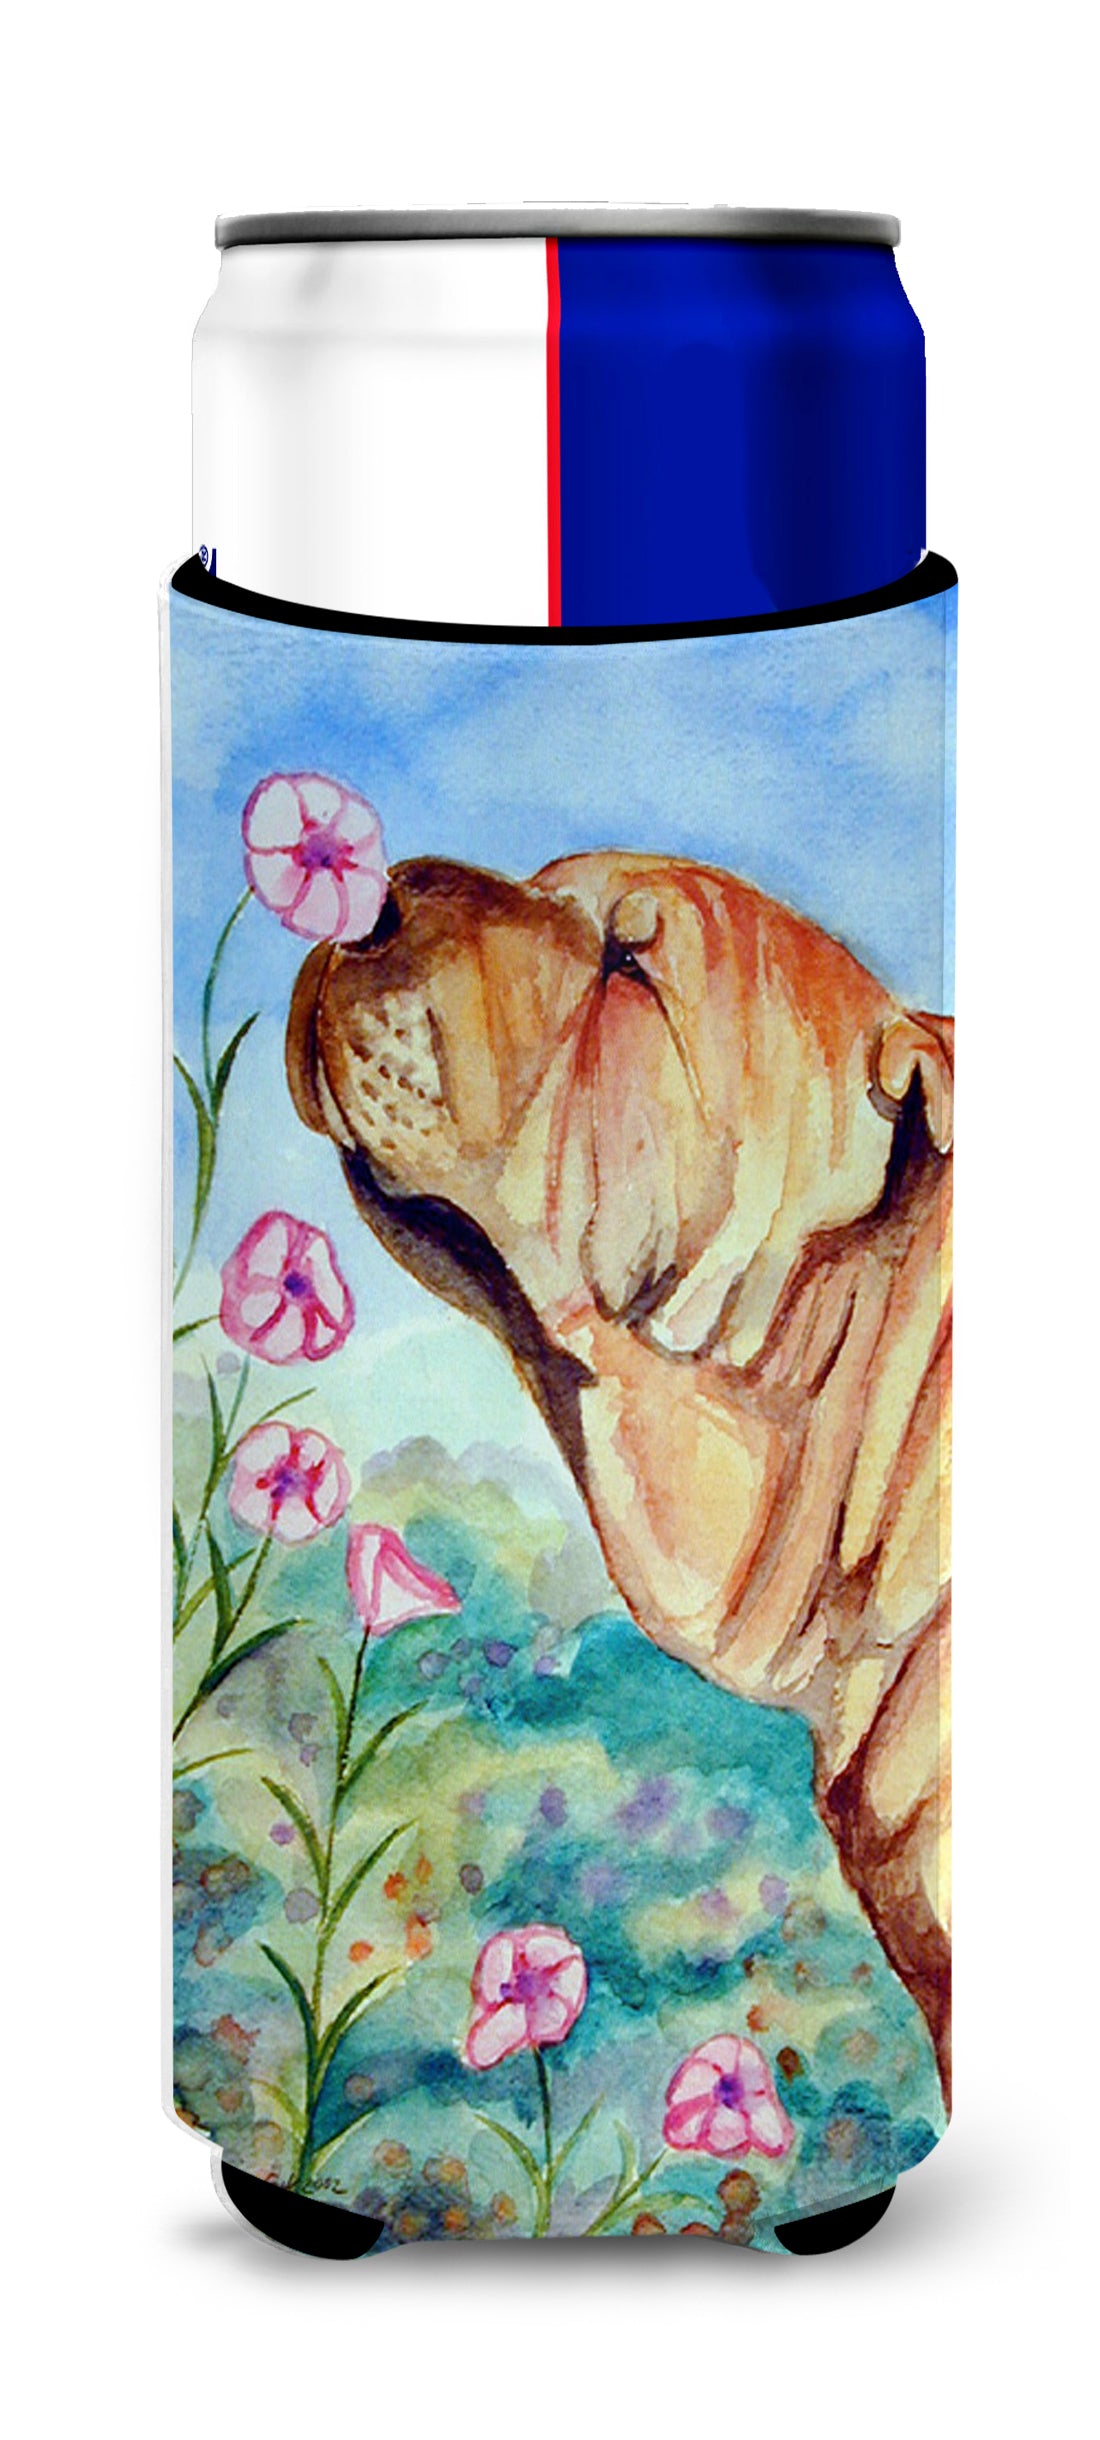 Shar Pei Smell the flowers Ultra Beverage Insulators for slim cans 7105MUK